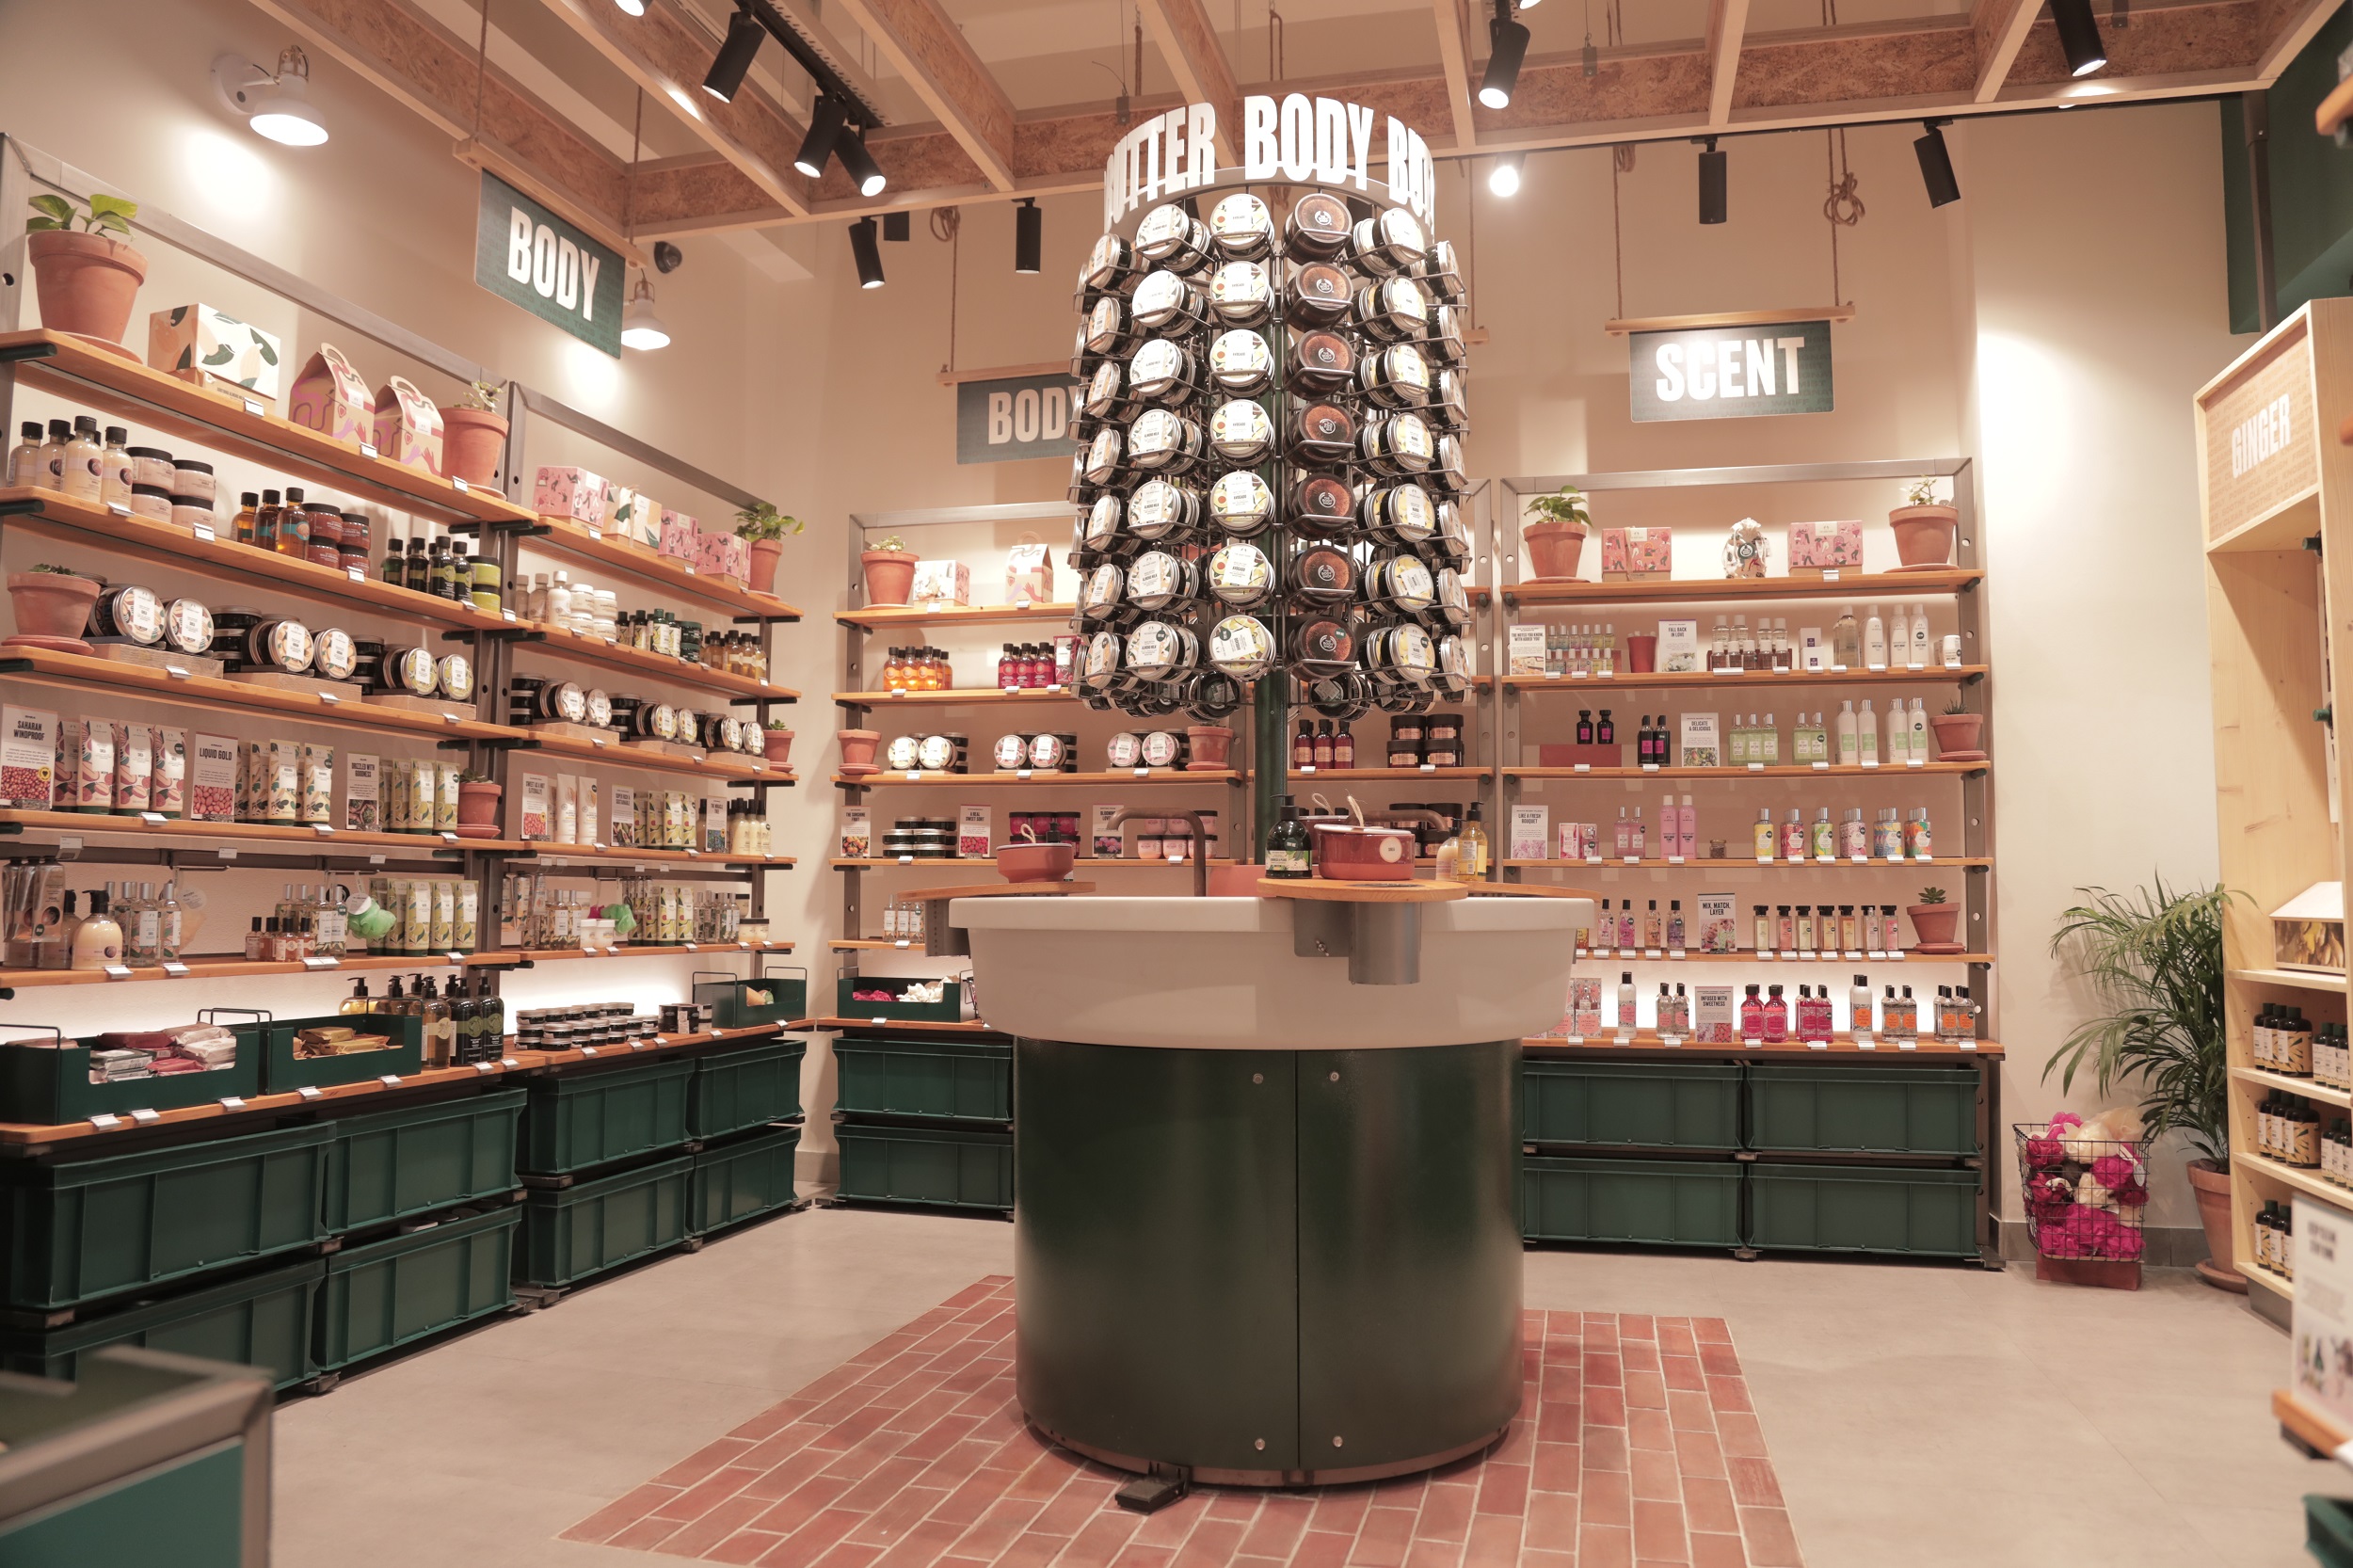 The Body Shop India's first sustainable activist workshop store